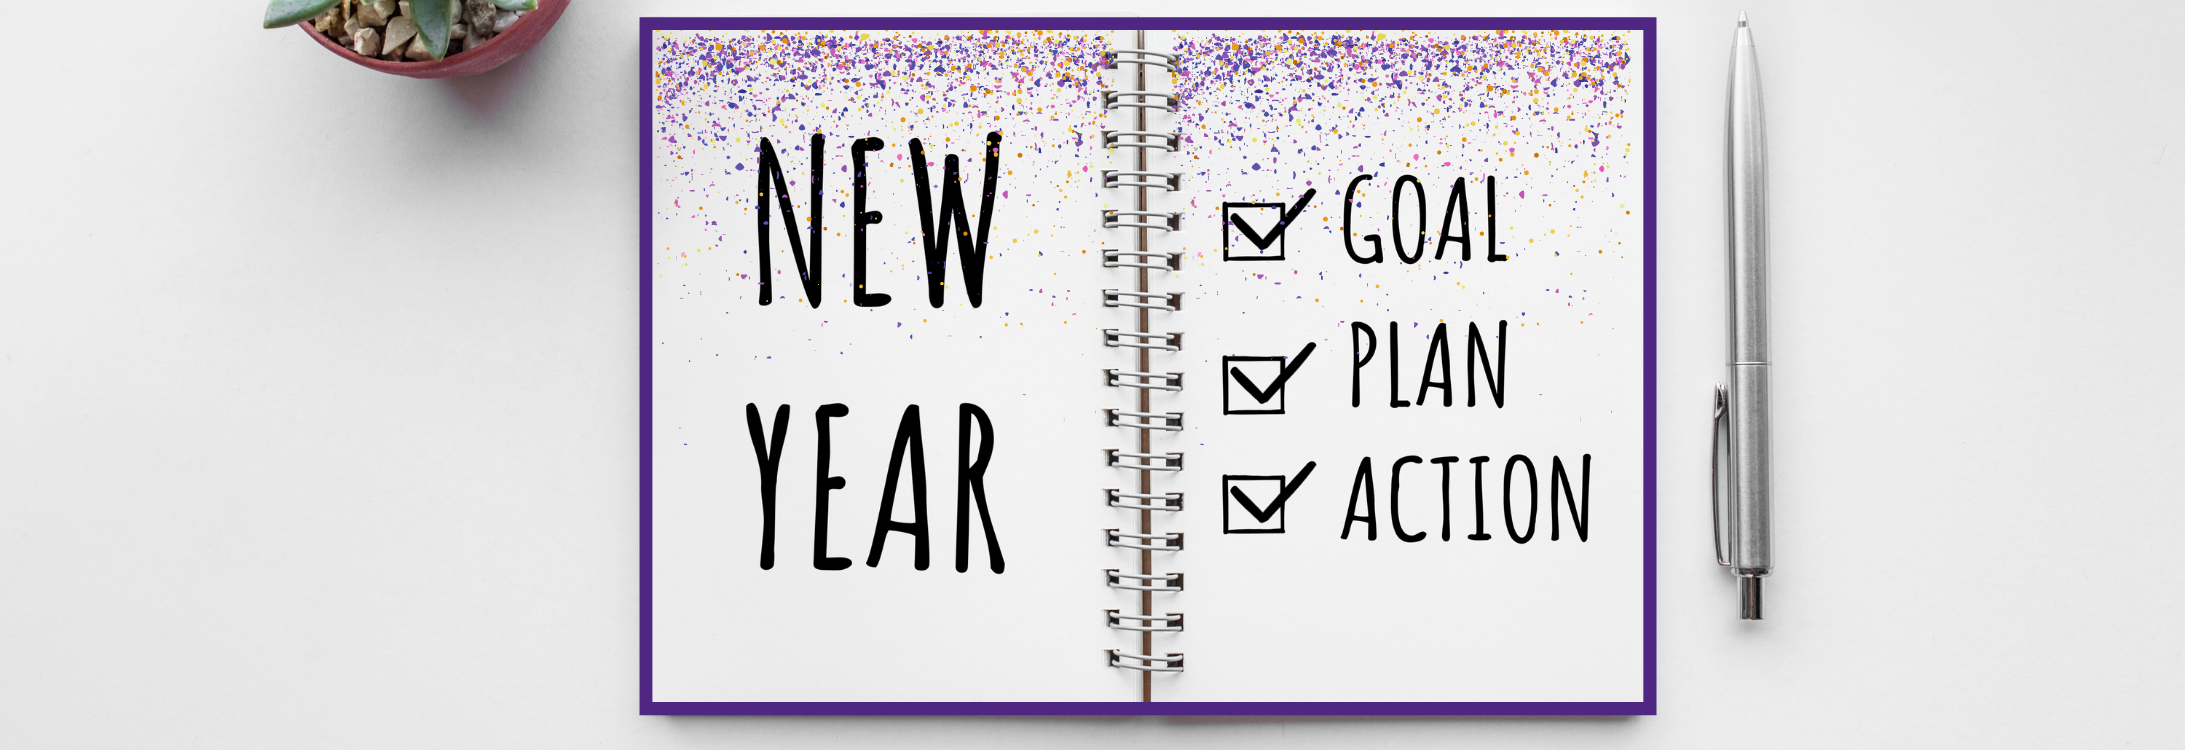 New Year - Goal, Plan, Action